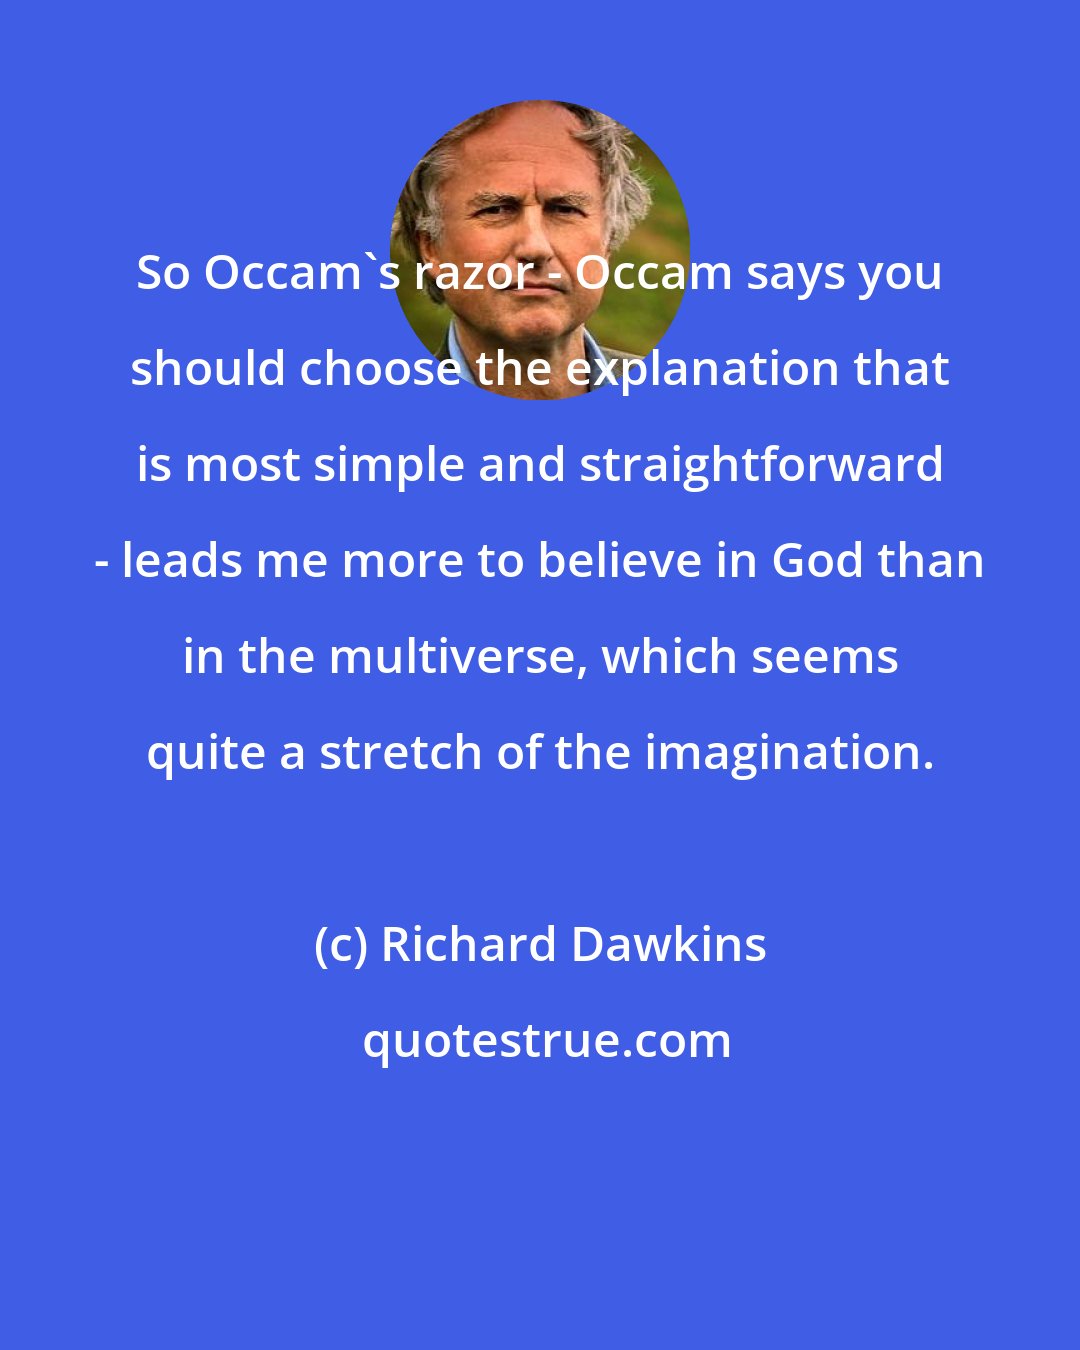 Richard Dawkins: So Occam's razor - Occam says you should choose the explanation that is most simple and straightforward - leads me more to believe in God than in the multiverse, which seems quite a stretch of the imagination.